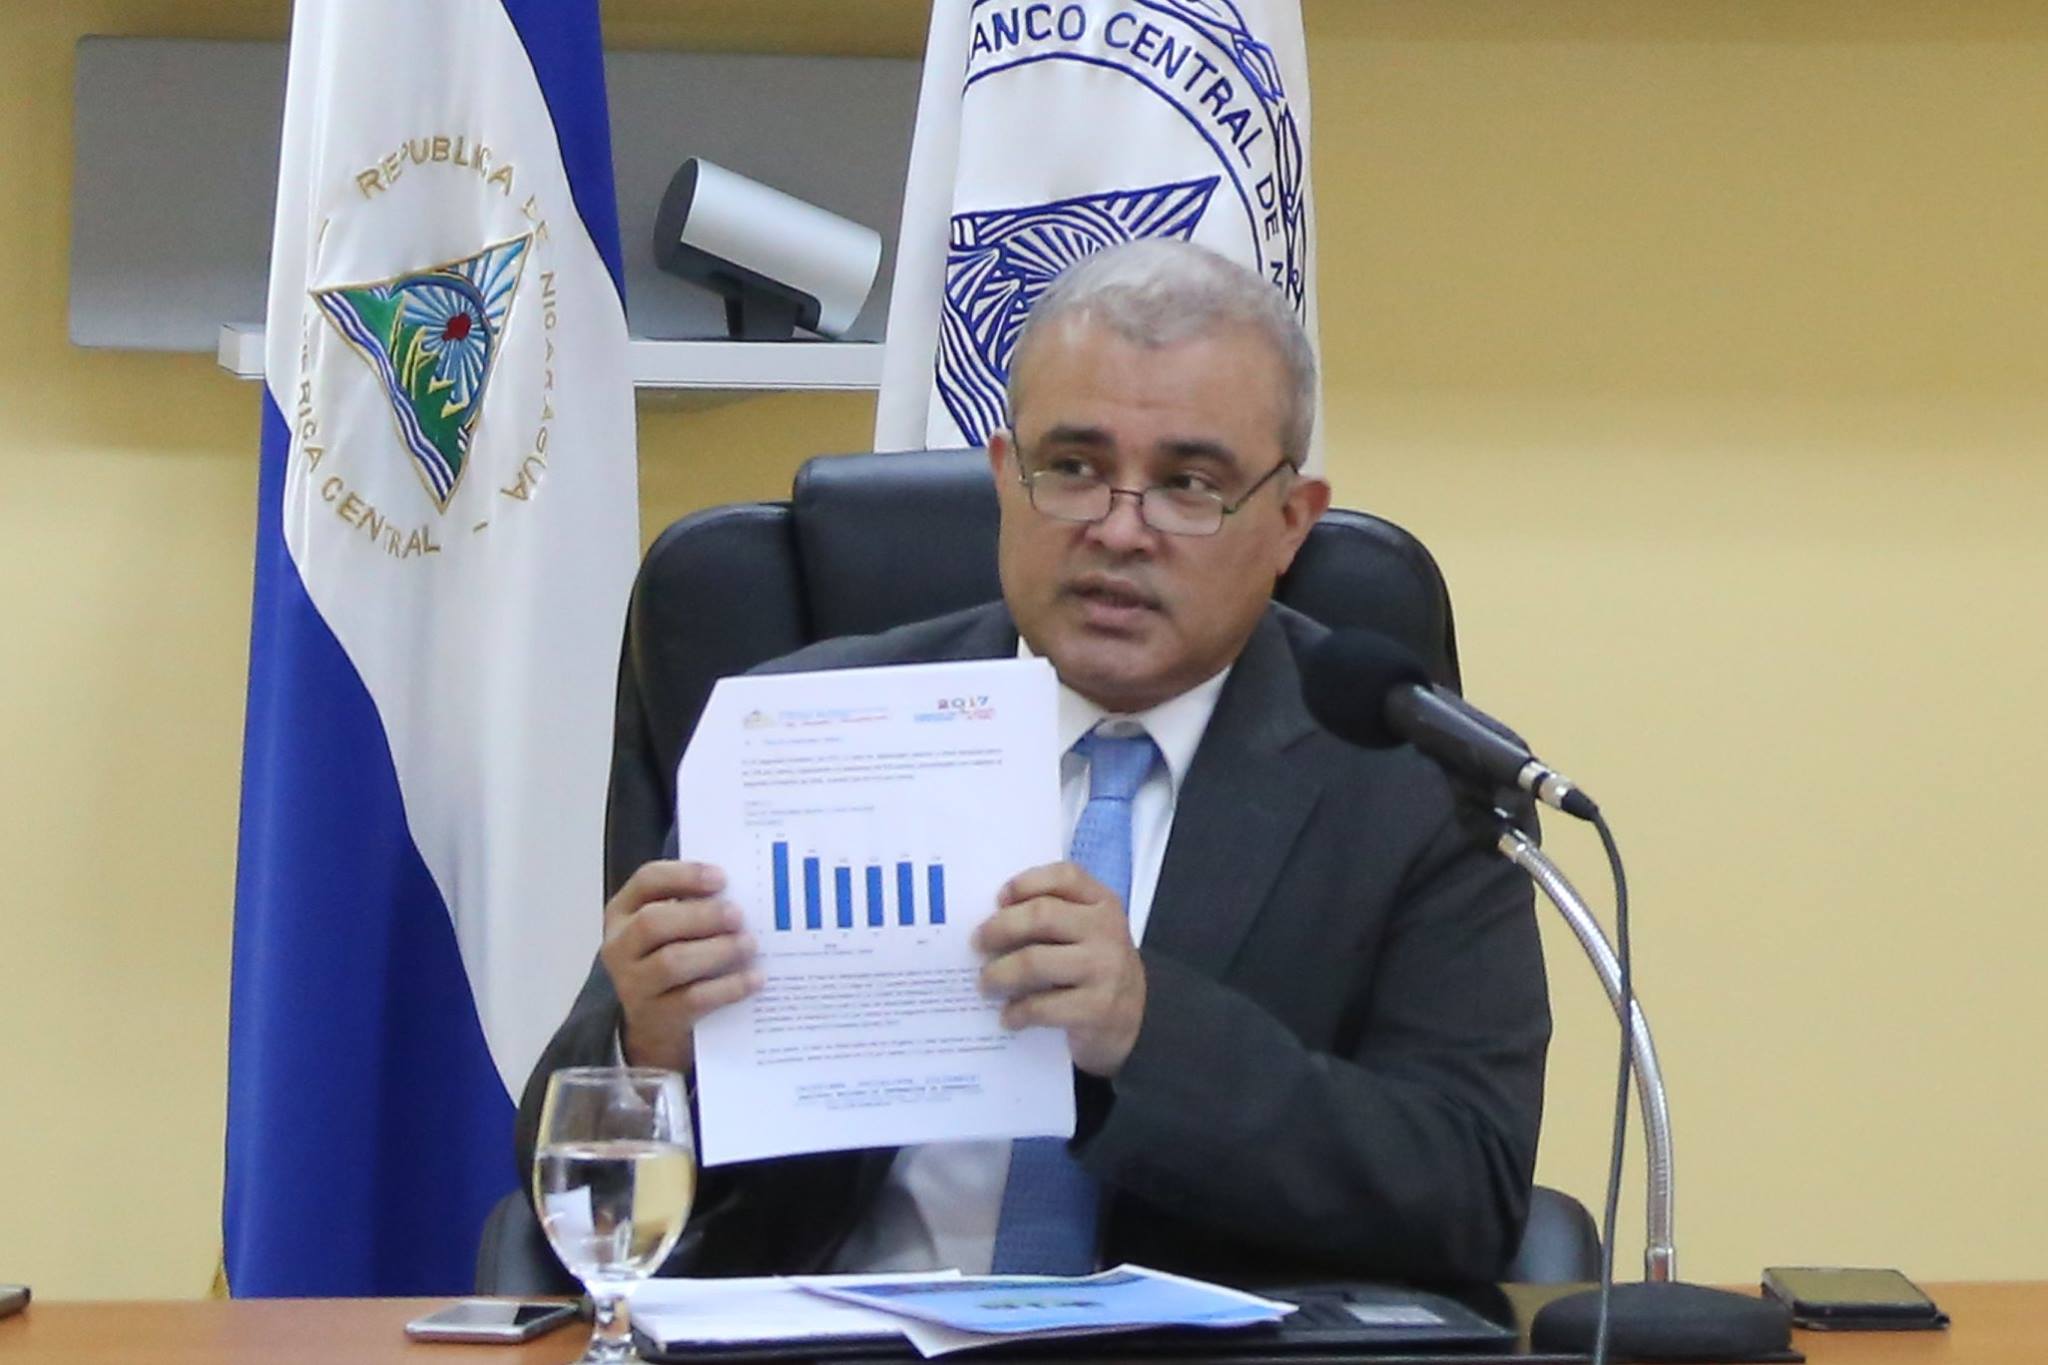 Nicaragua captured 23.4% more in direct foreign investment, says the Central Bank